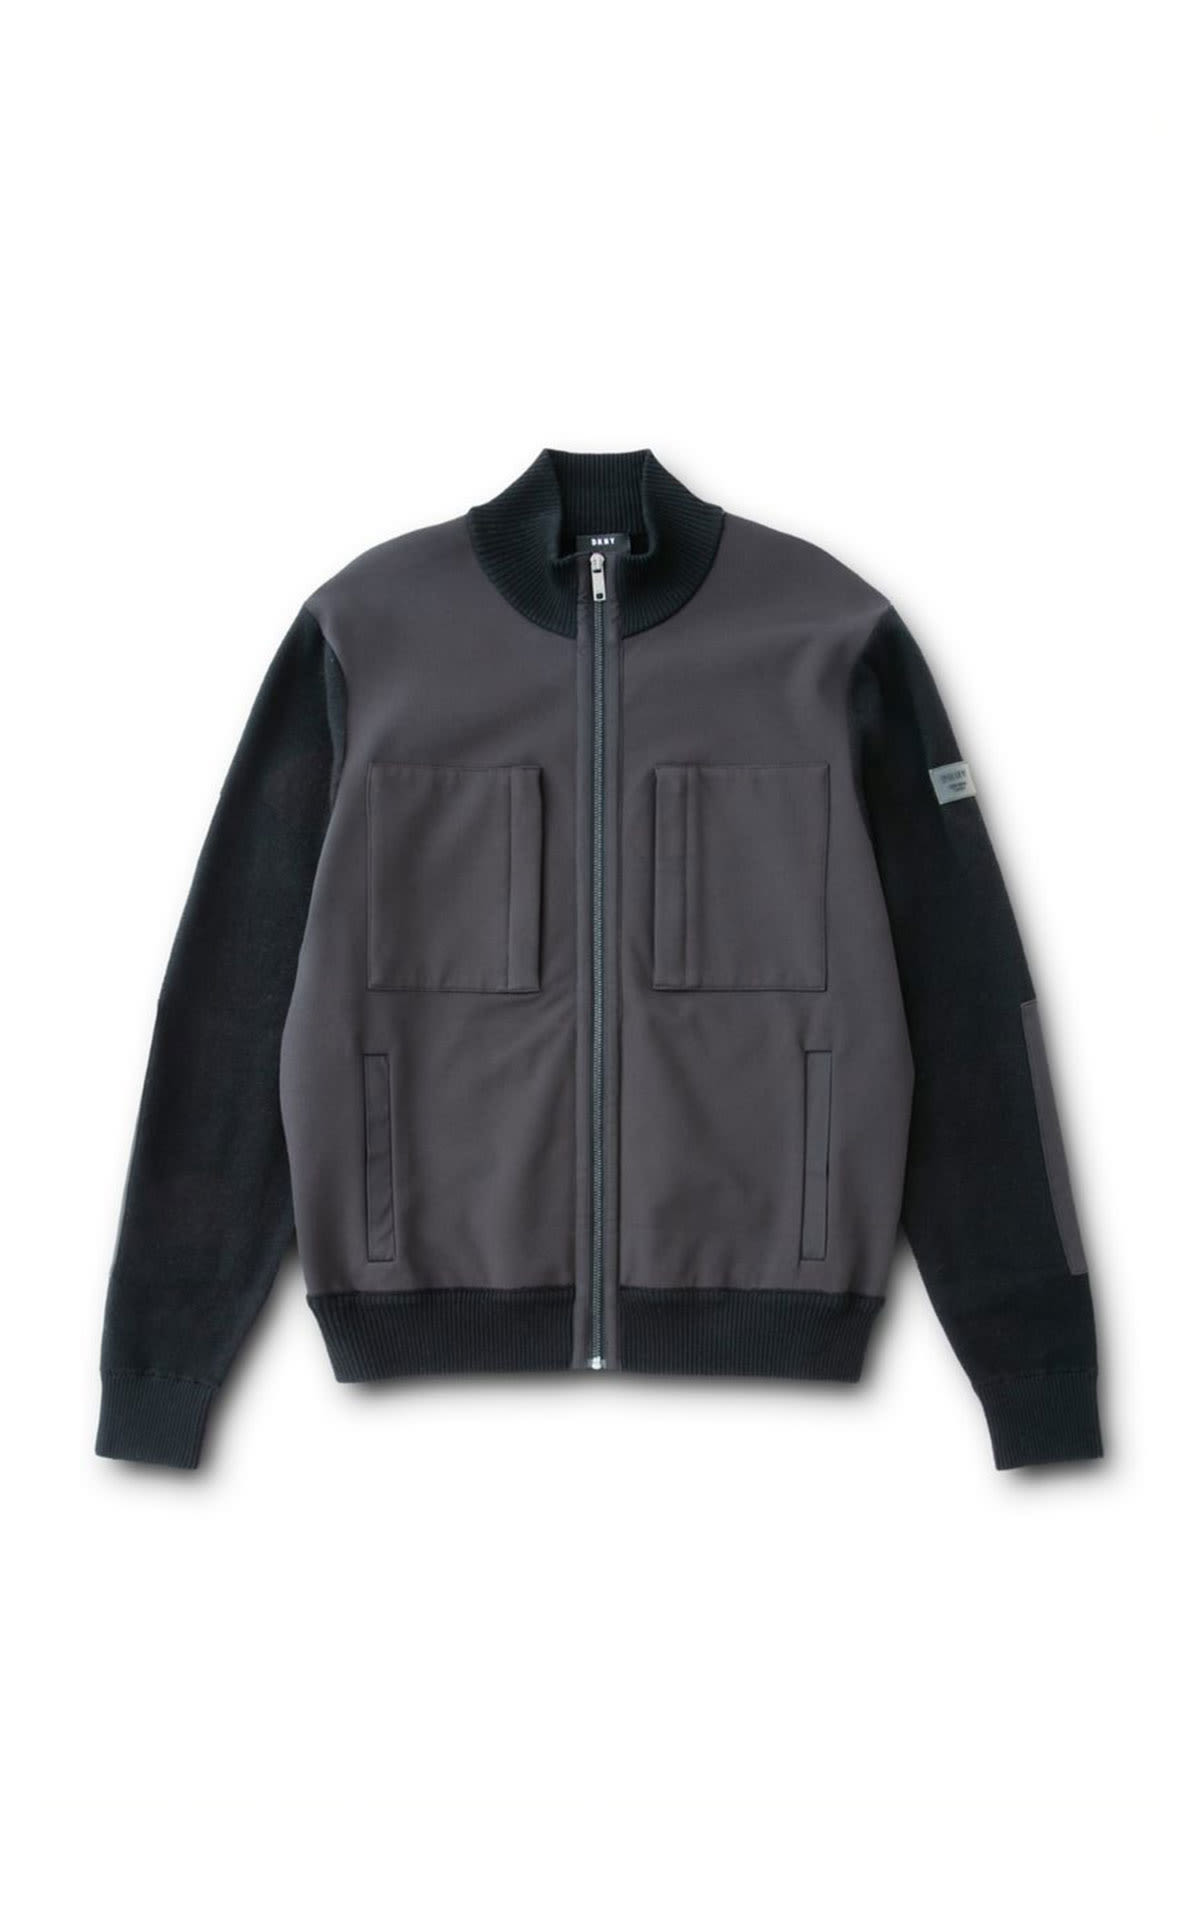 DKNY Four pocket bomber from Bicester Village